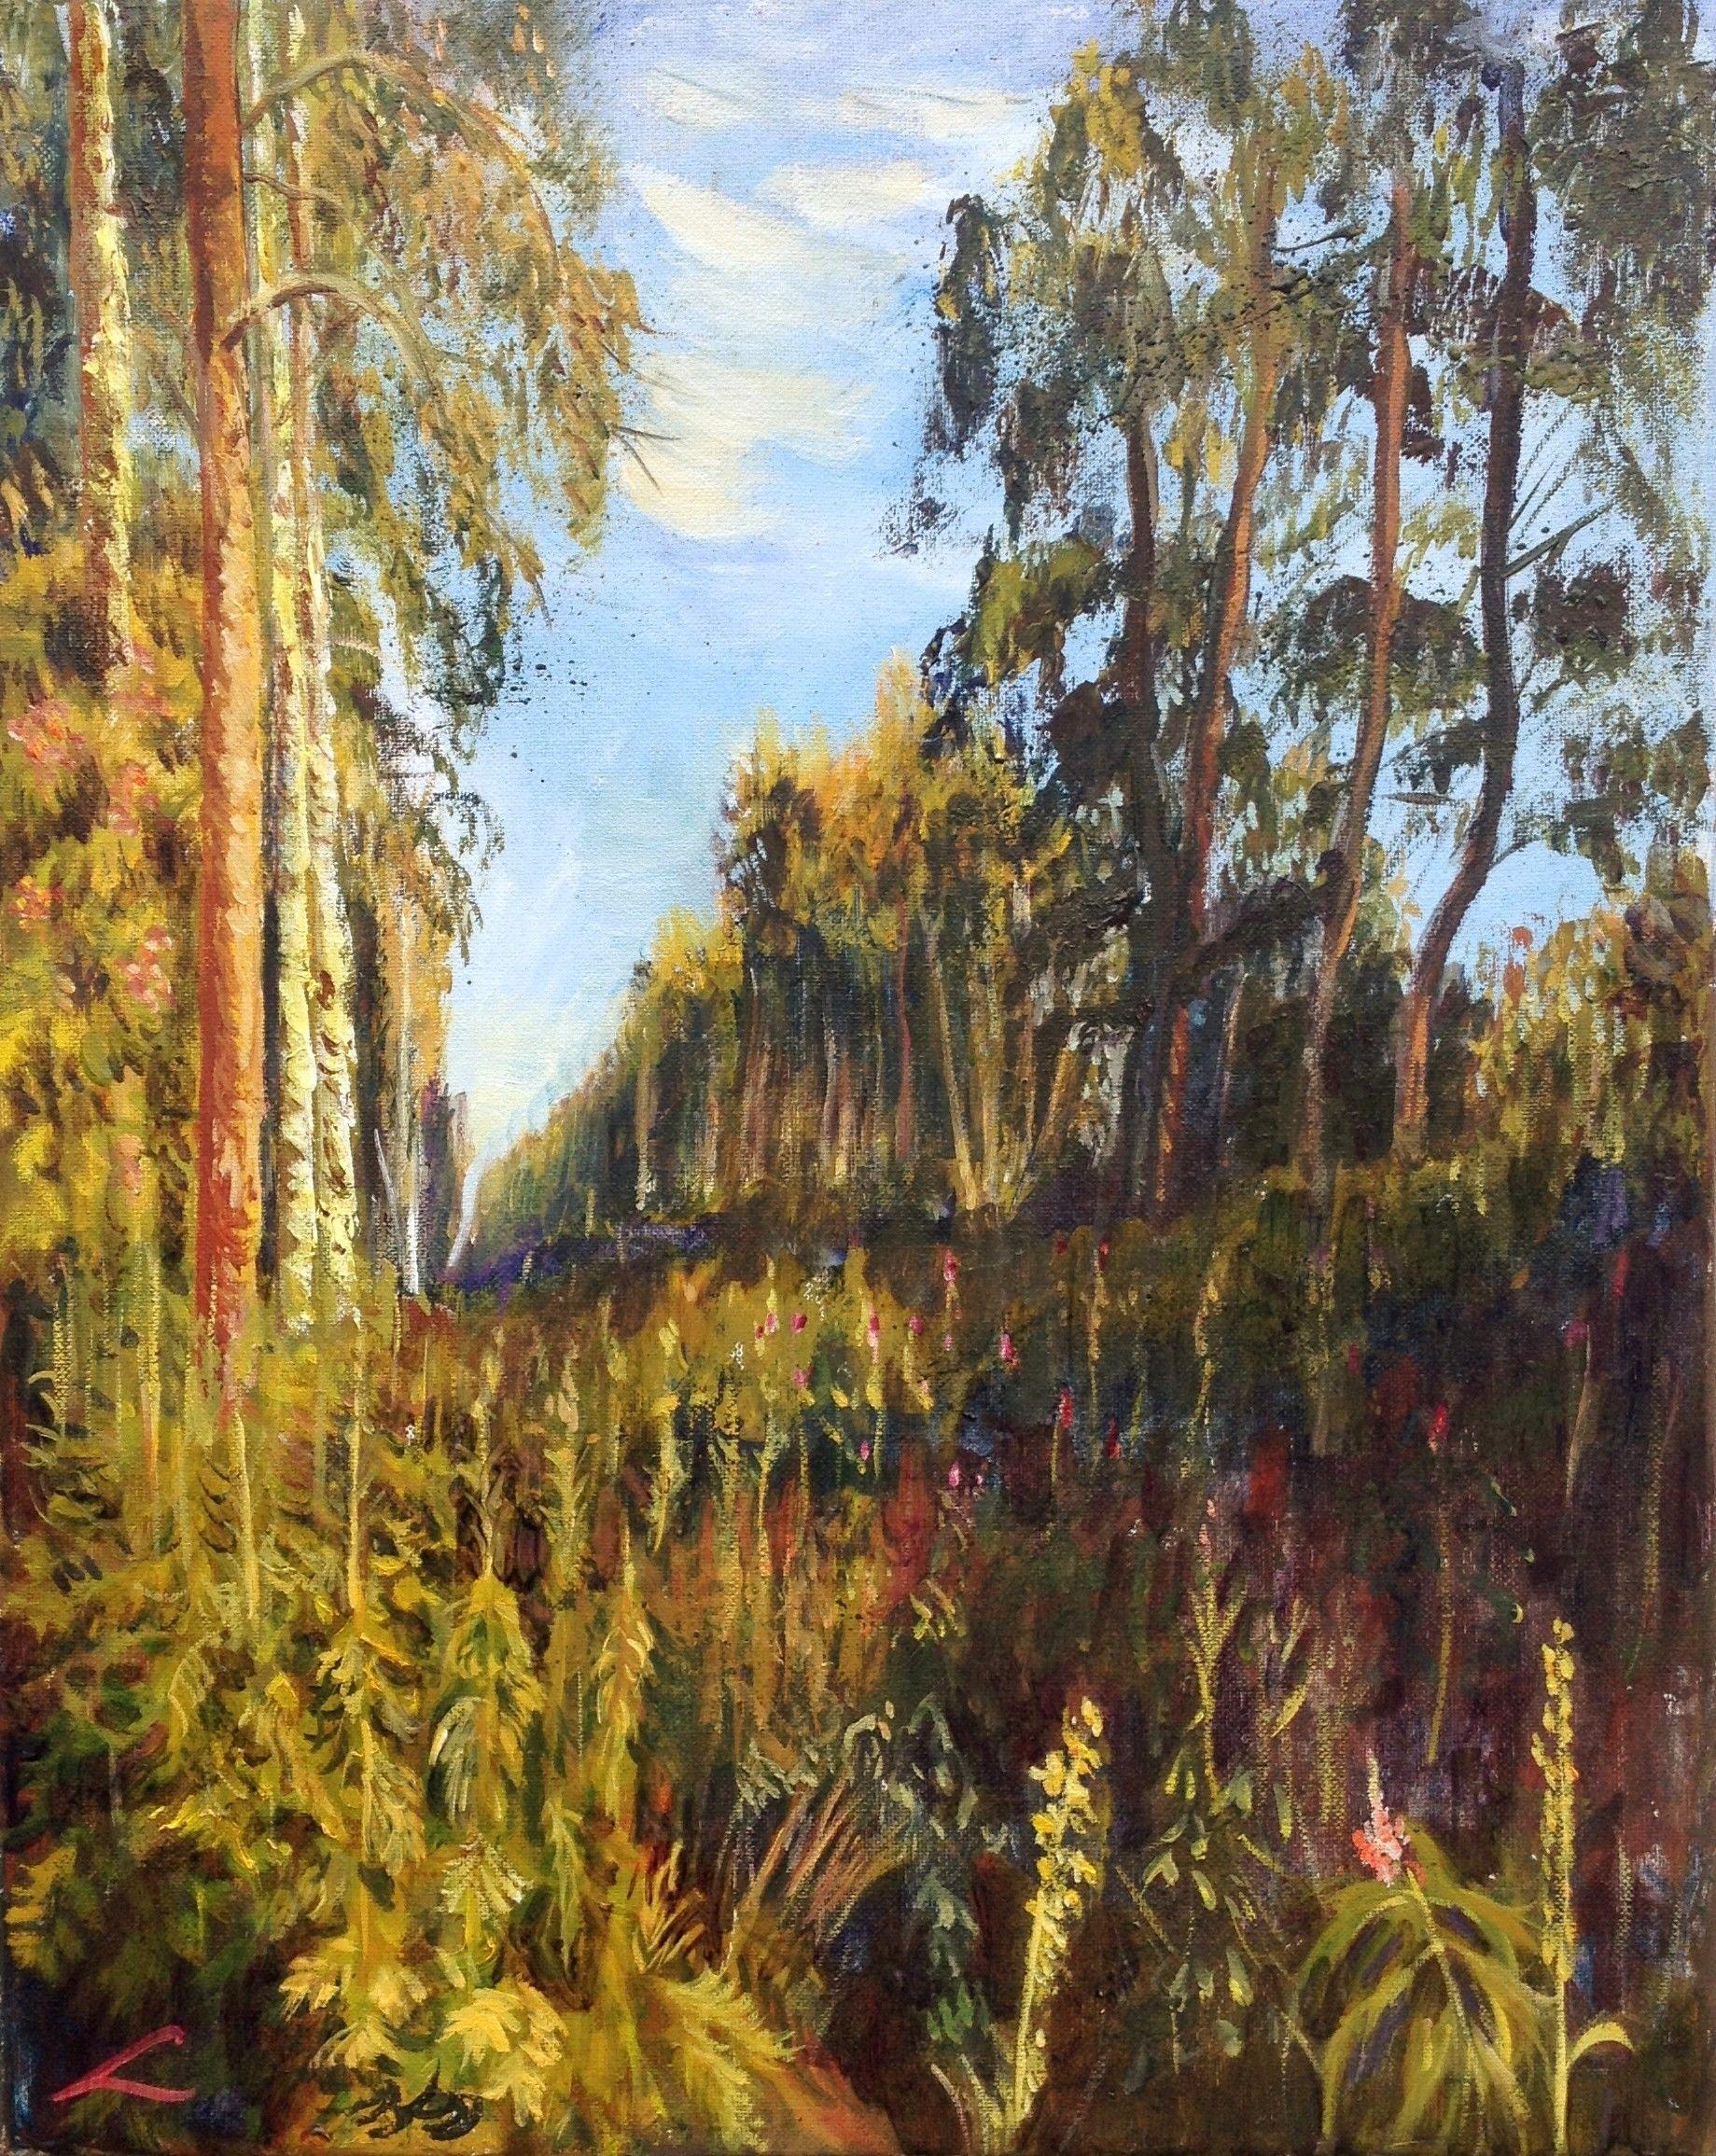 Elena Sokolova Landscape Painting - Forest way in the evening light, Painting, Oil on Canvas